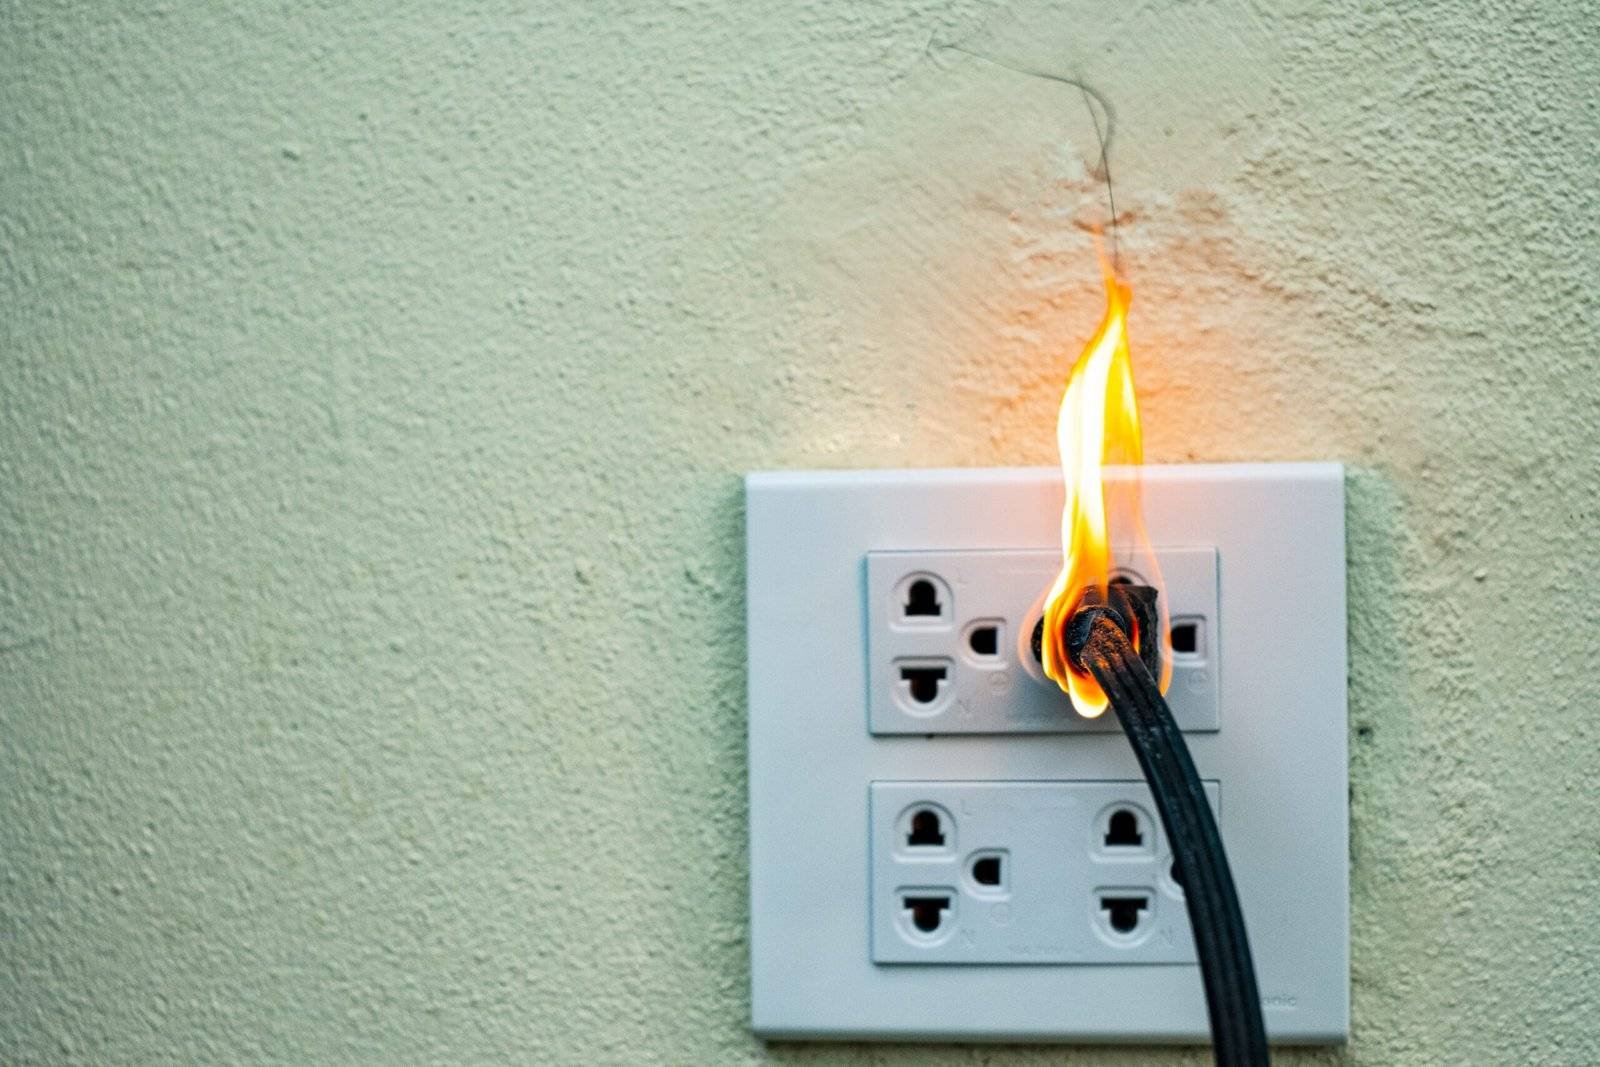 Electrical Issues housing disrepair claims